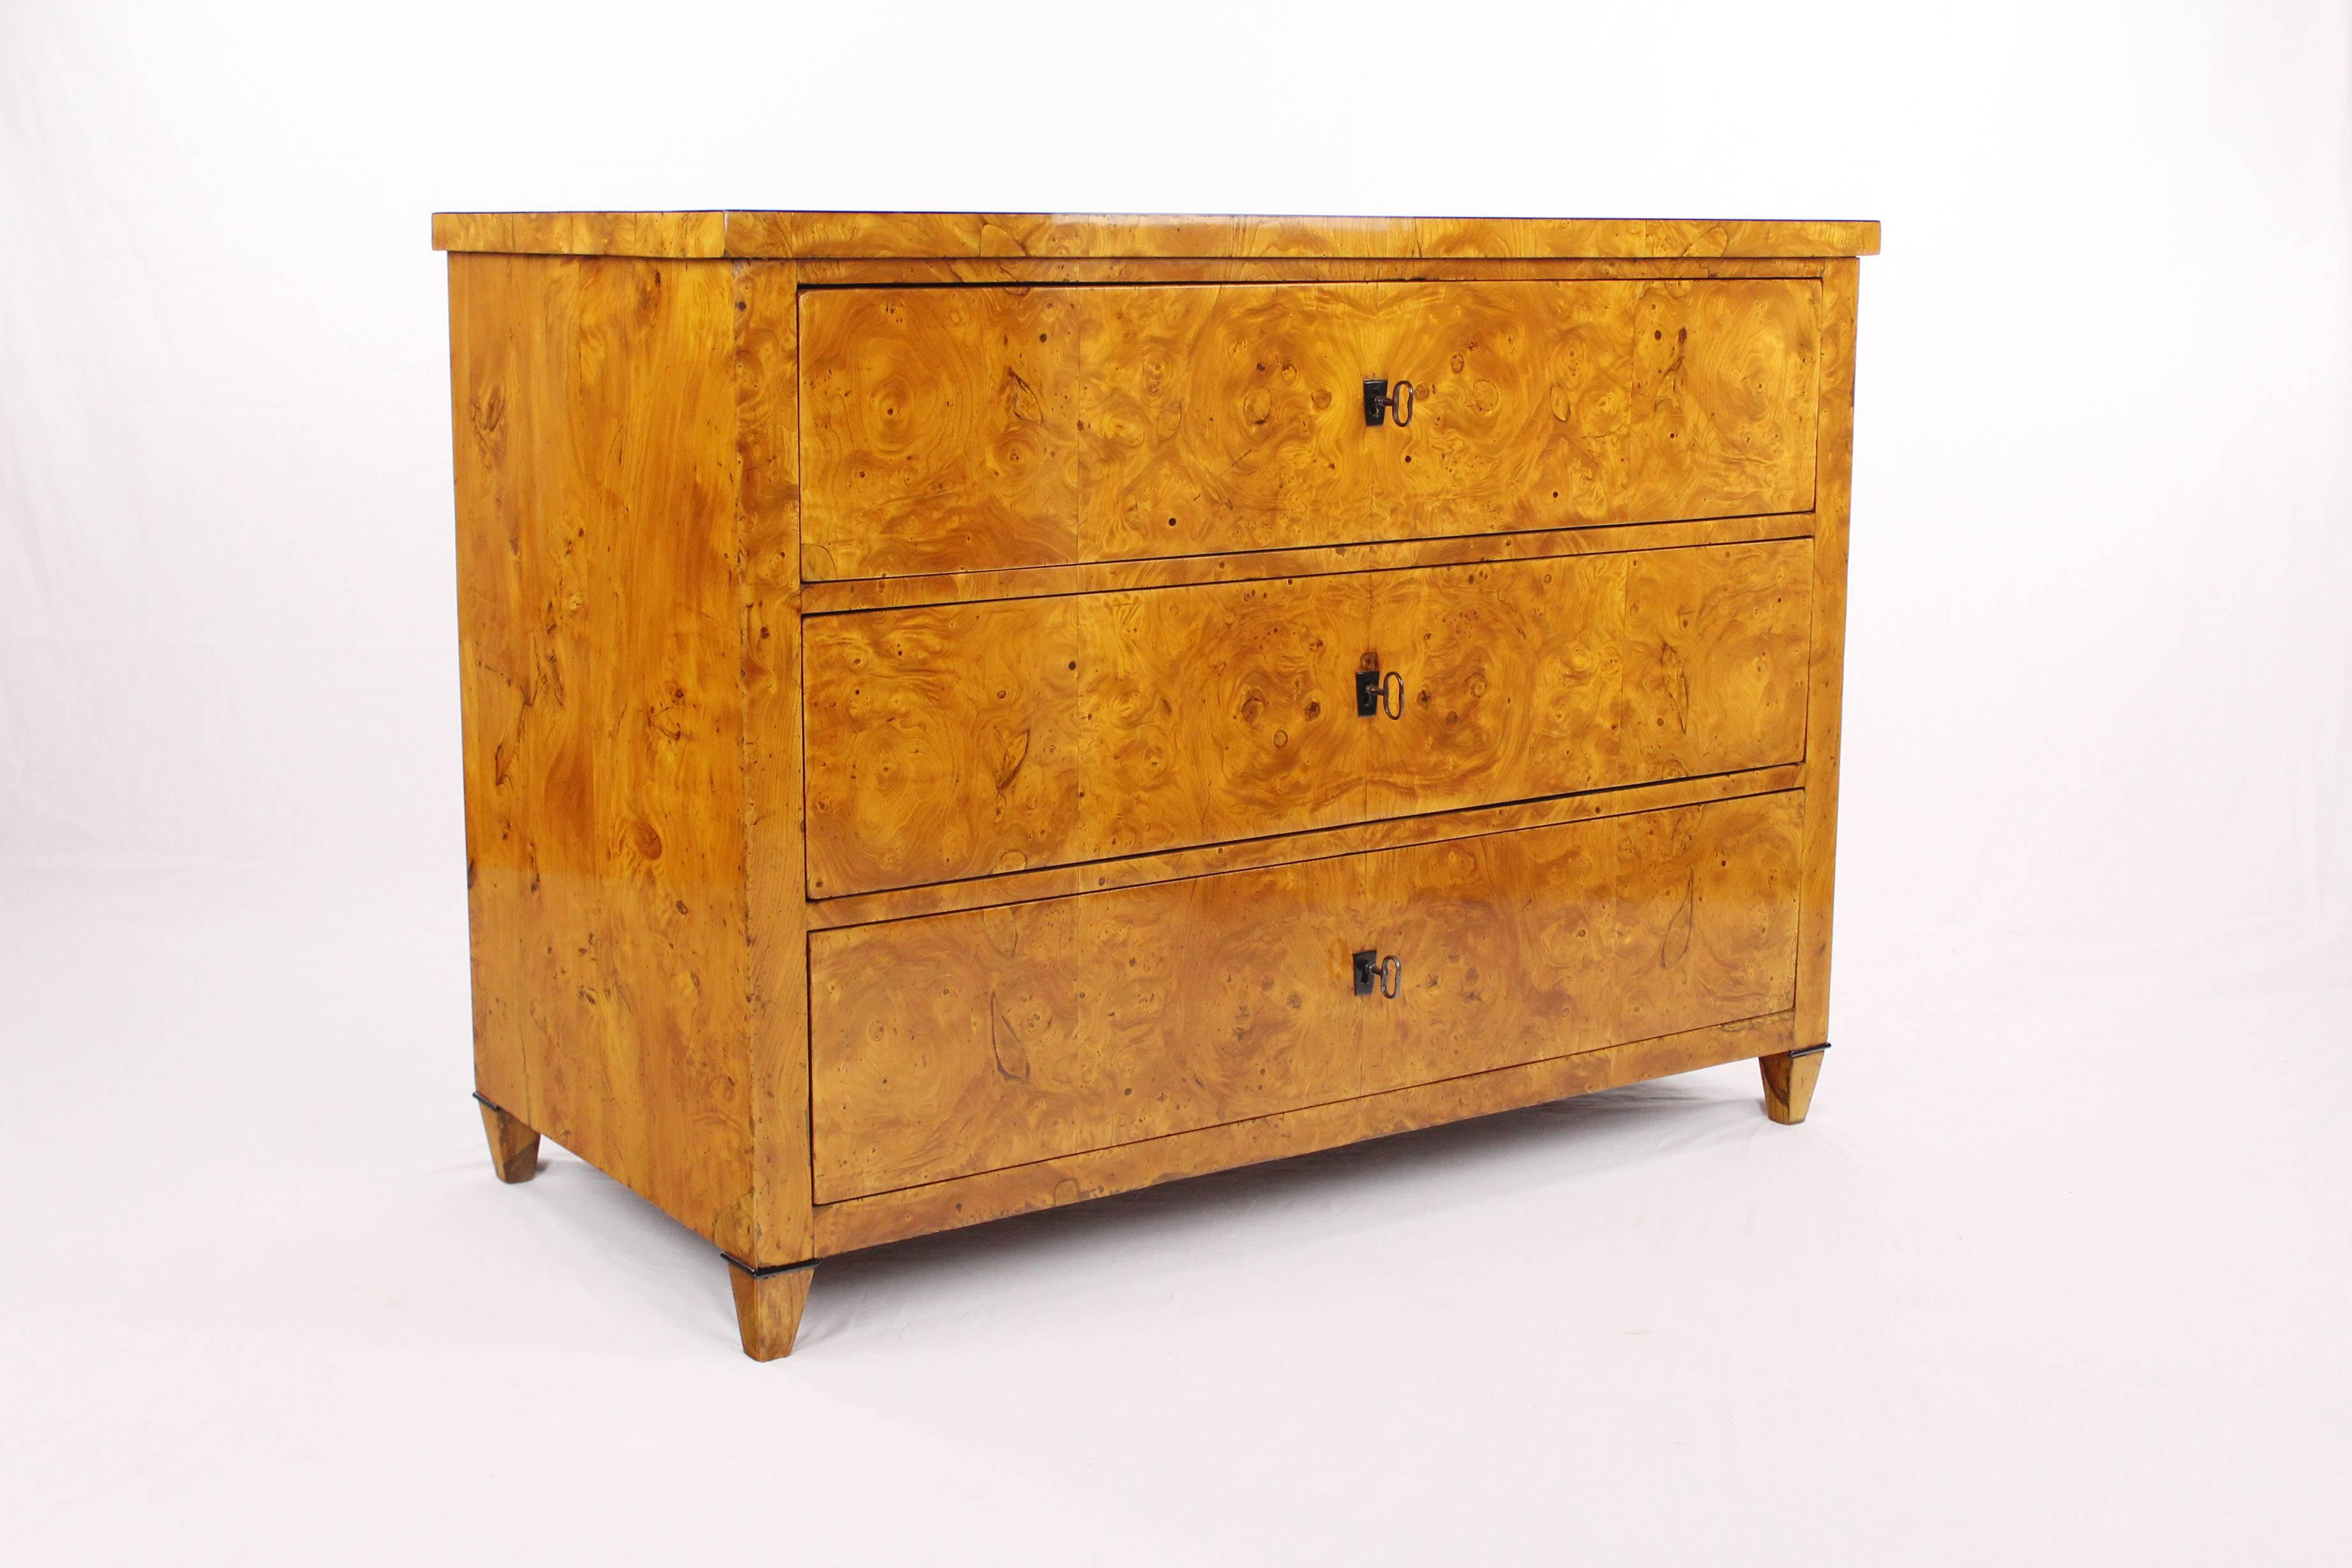 • Biedermeier period chest of drawers, circa 1820
• Ash root wood veneered
• 3 pushes
• Partly ebonized
• Restored residential-ready state
• French shellac hand polish
• Height: 79.5 cm, width: 107.5 cm, depth: 52.5 cm

Delivery can be made